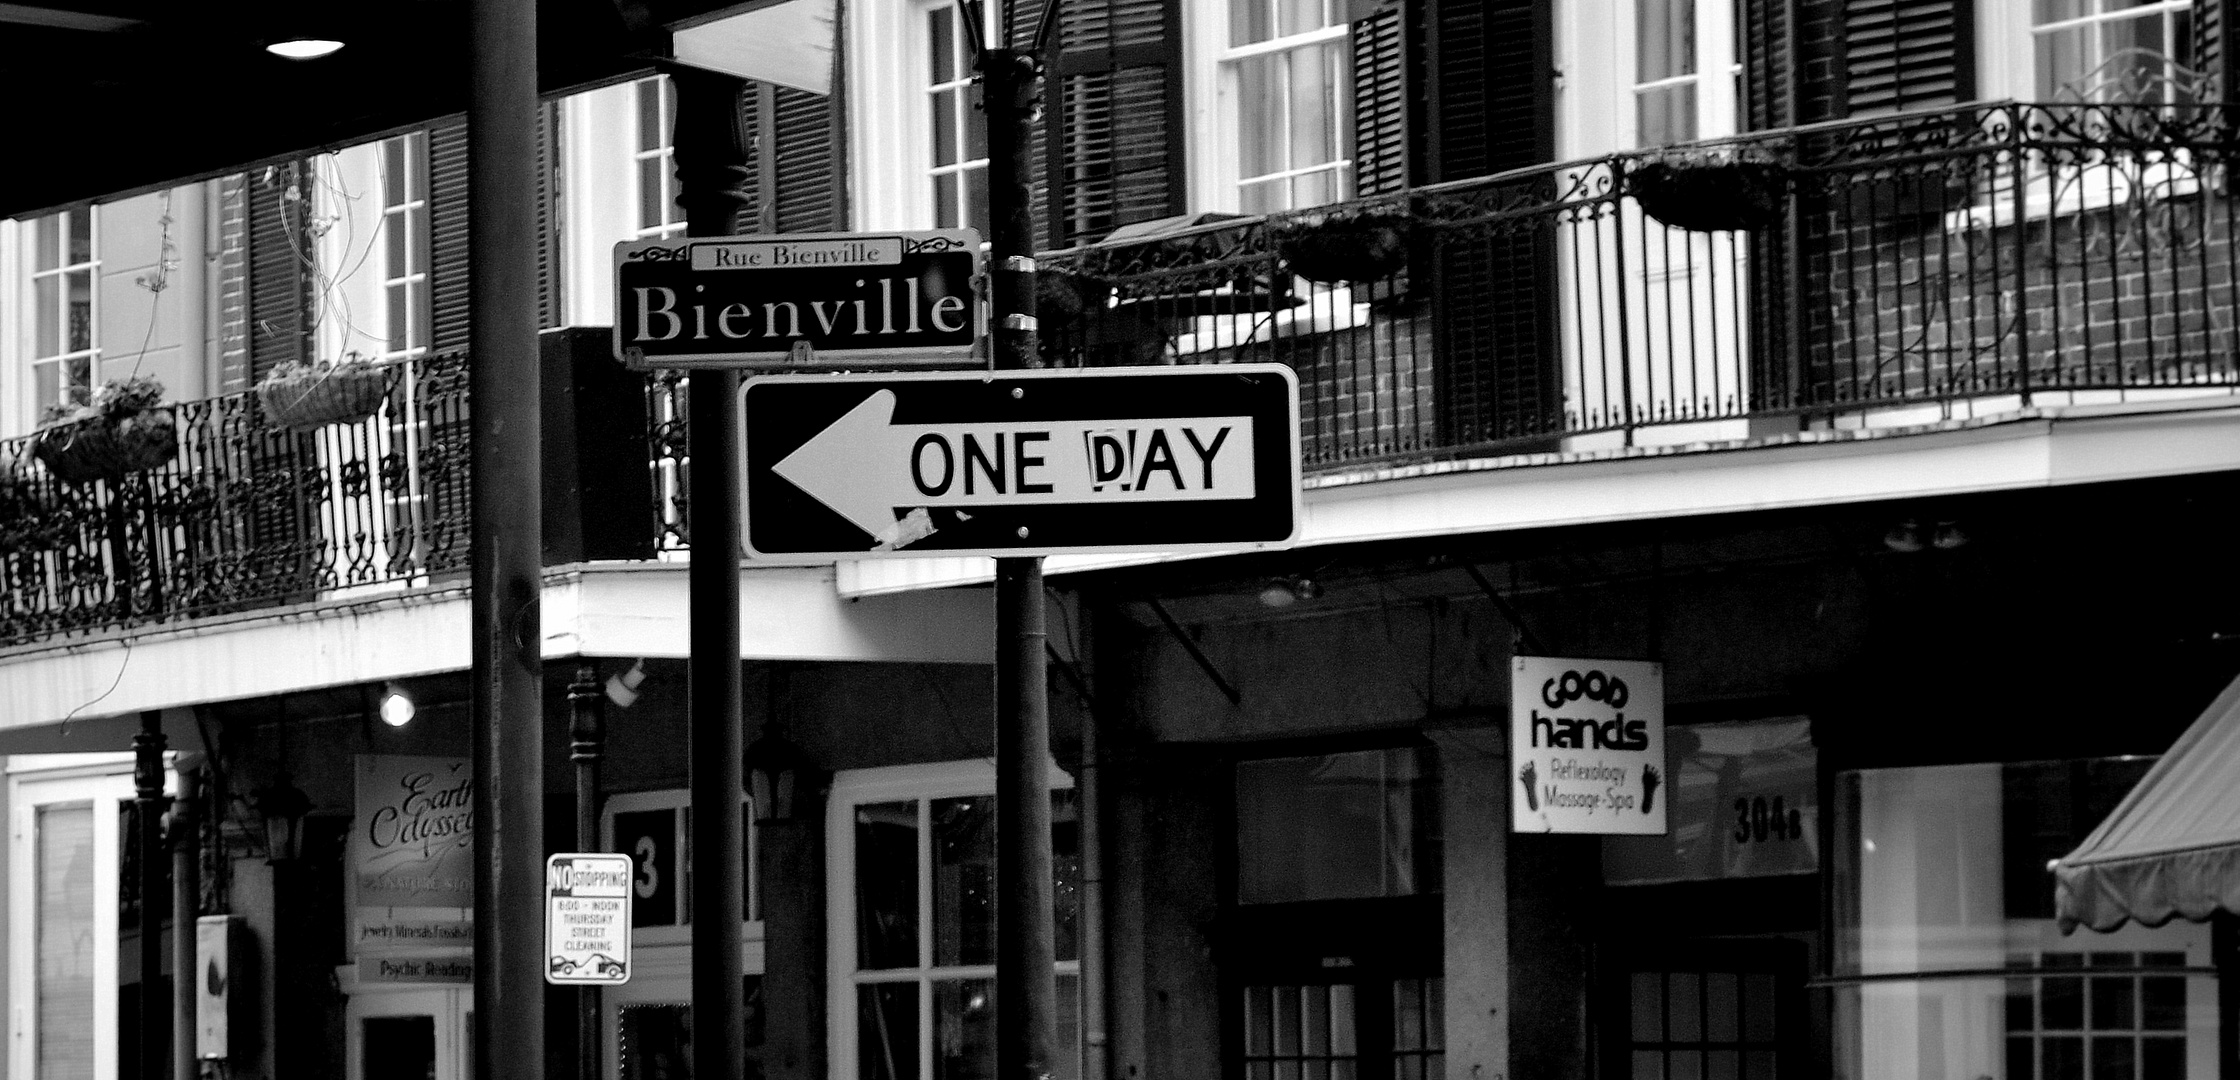 One day - New Orleans